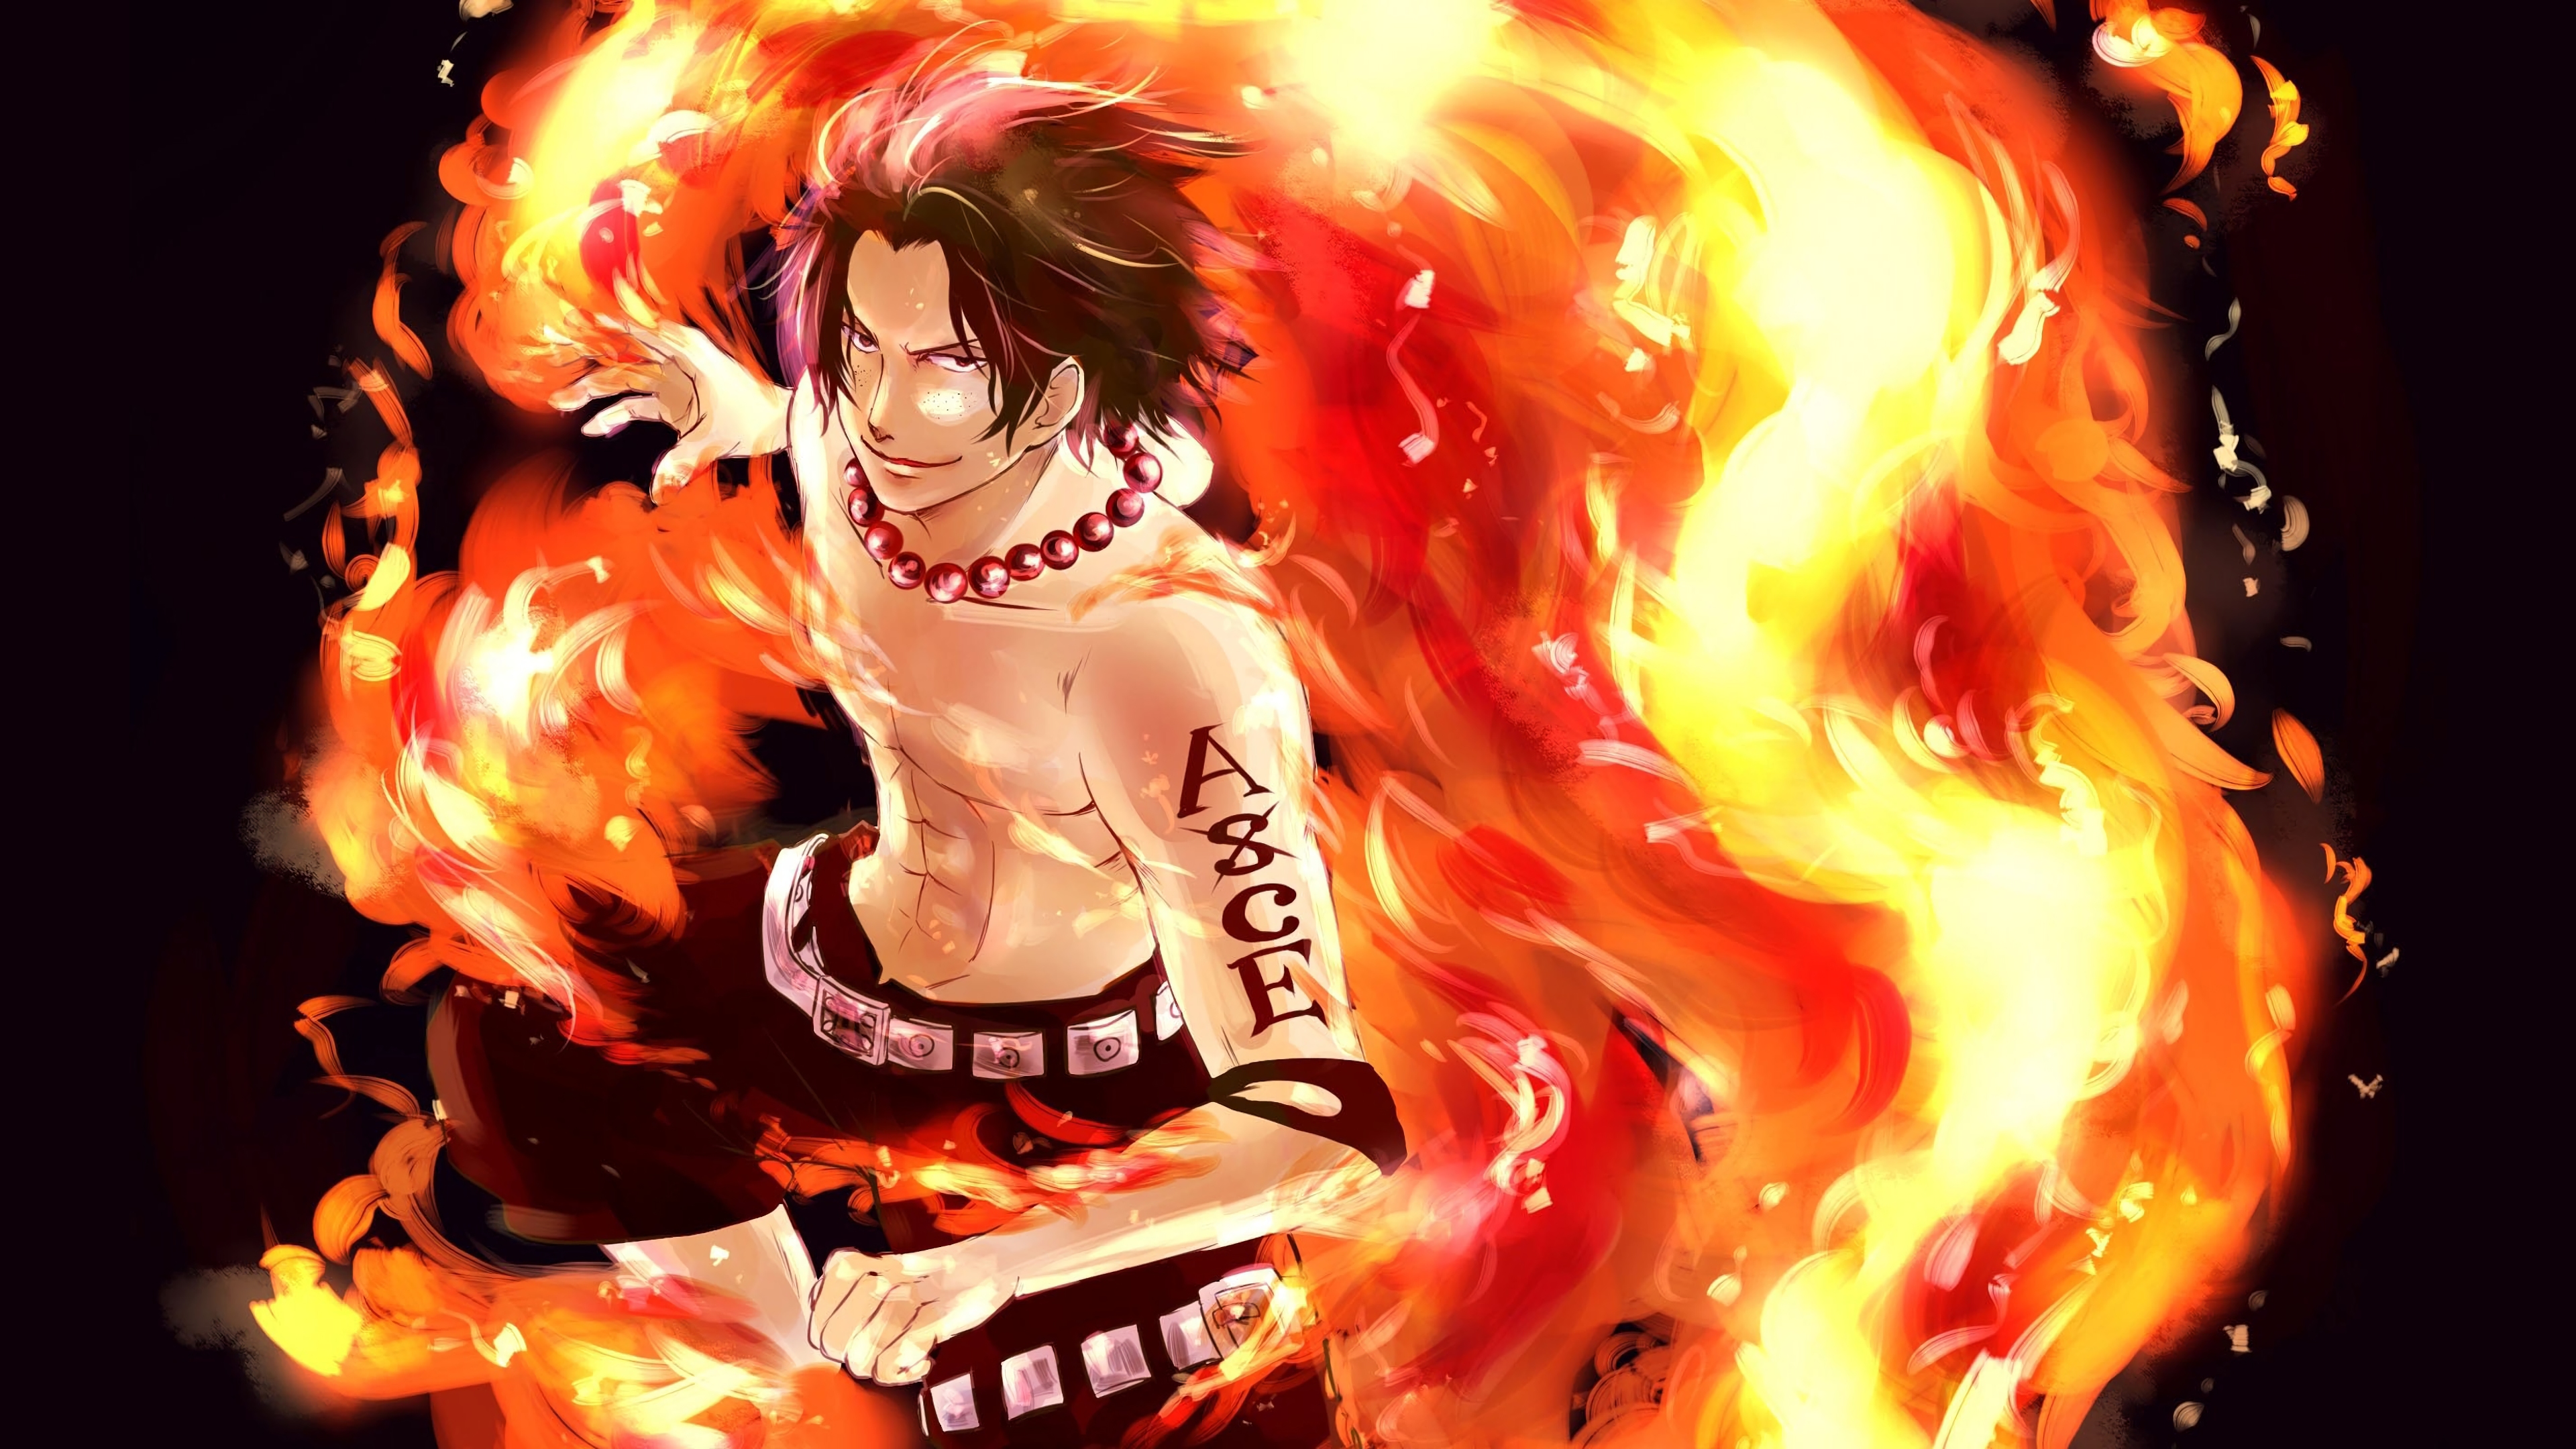 Mobile wallpaper One Piece Portgas D Ace Anime 1185995 download the  picture for free